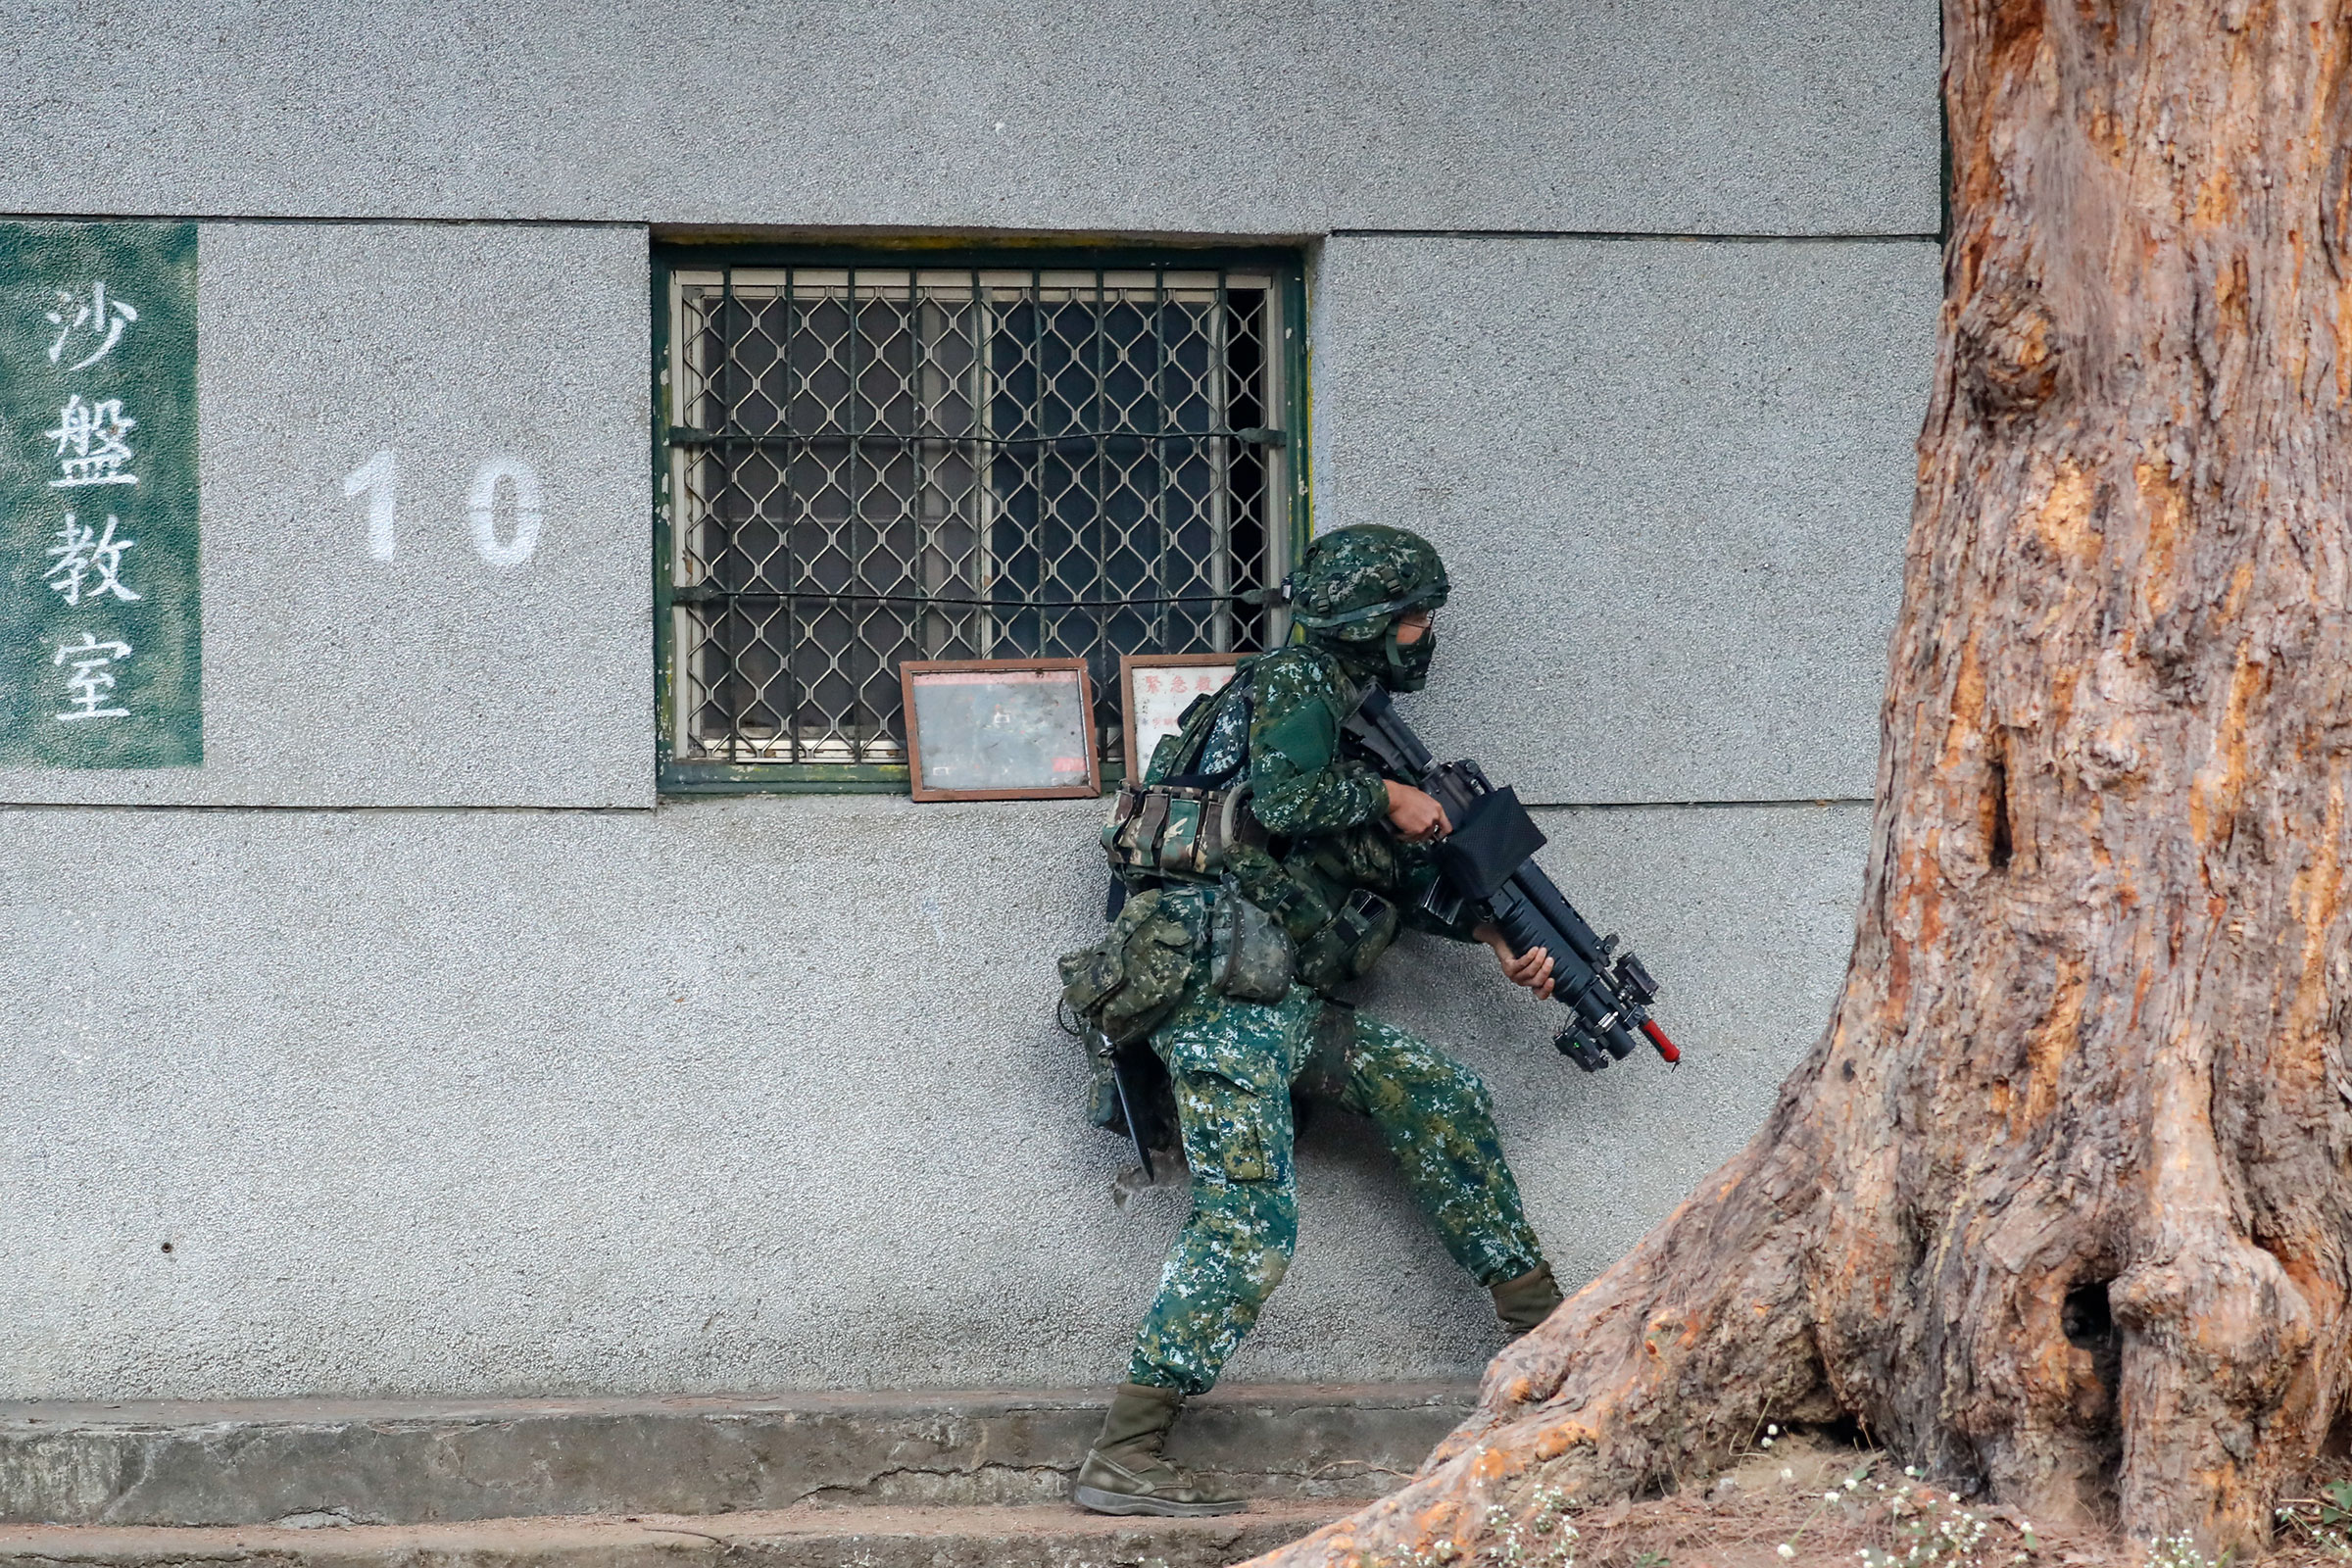 Taiwanese army soldiers during a Readiness Enhancement Drill, amid escalating Taiwan-China tensions, in Taiwan, in Jan. 2022. (Ceng Shou Yi—NurPhoto/Getty Images)